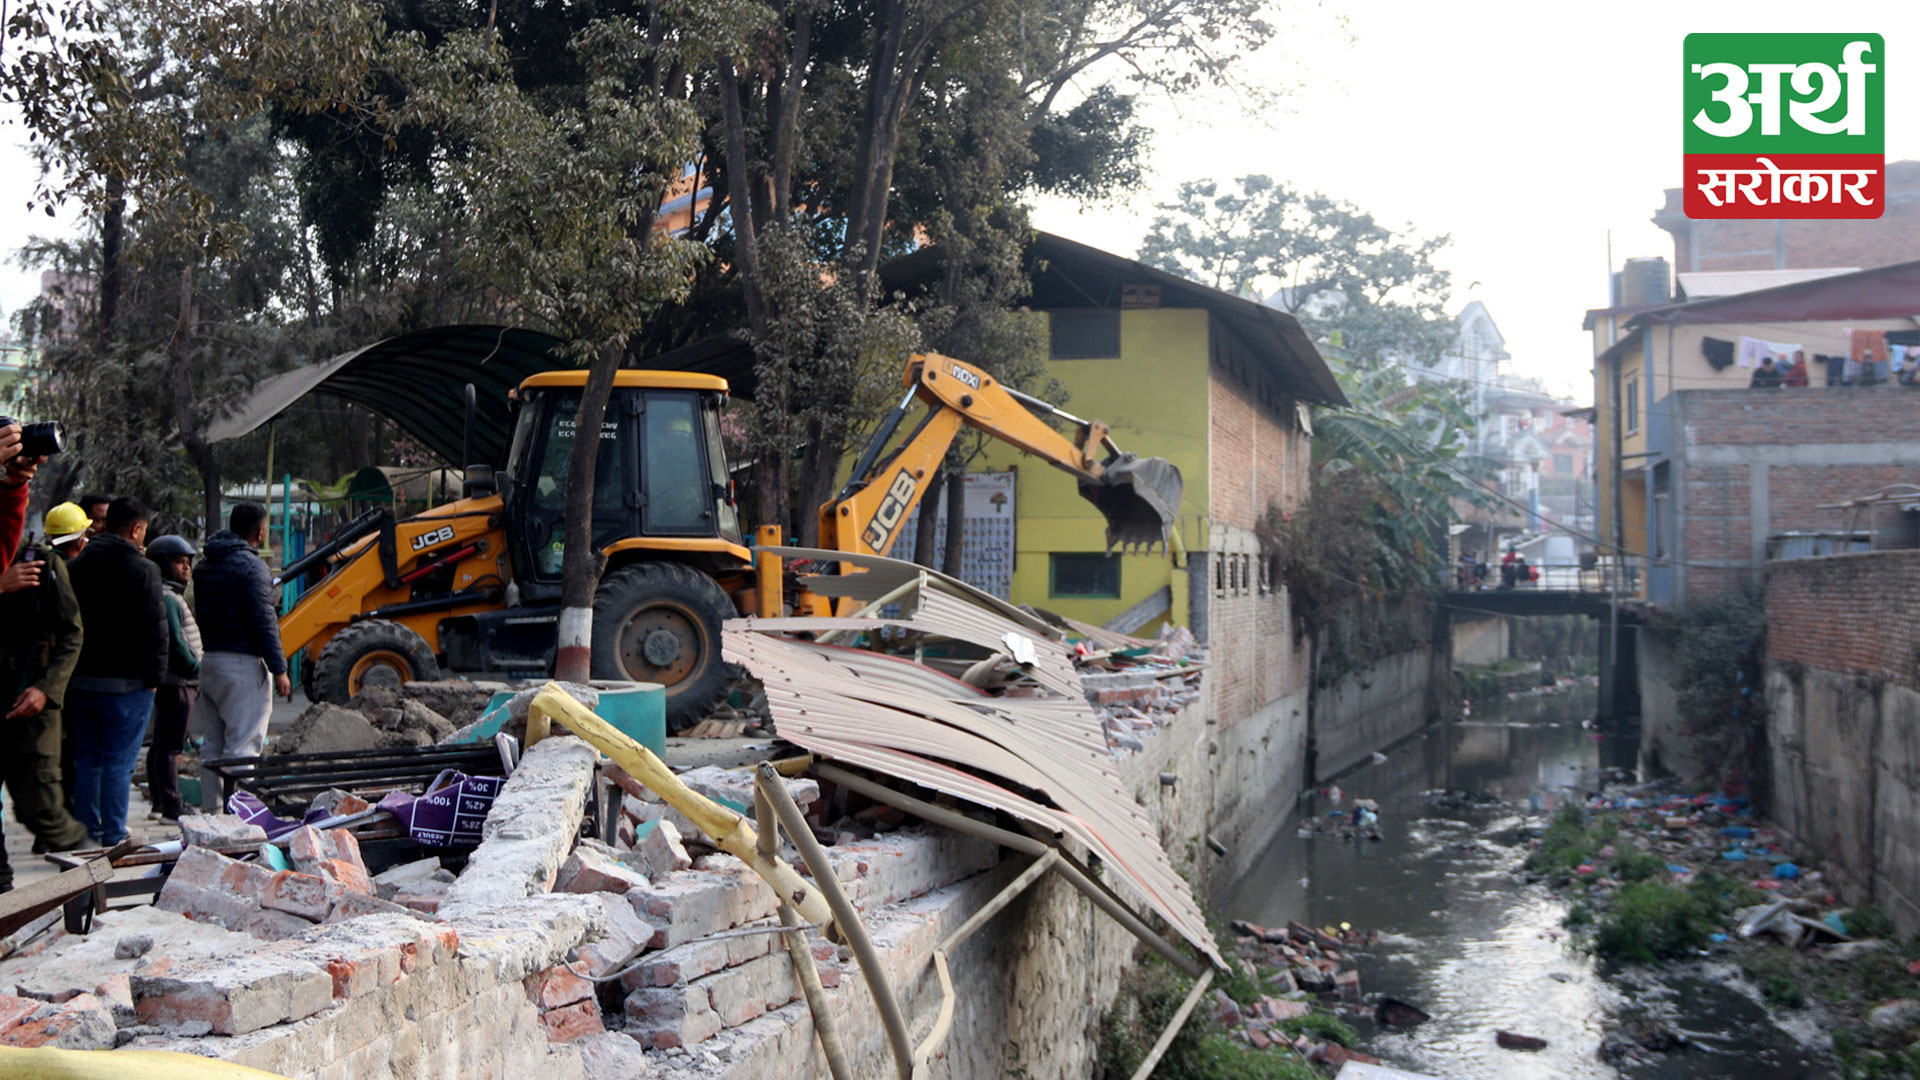 Illegal structures constructed along the Bishnumati river banks are being evicted